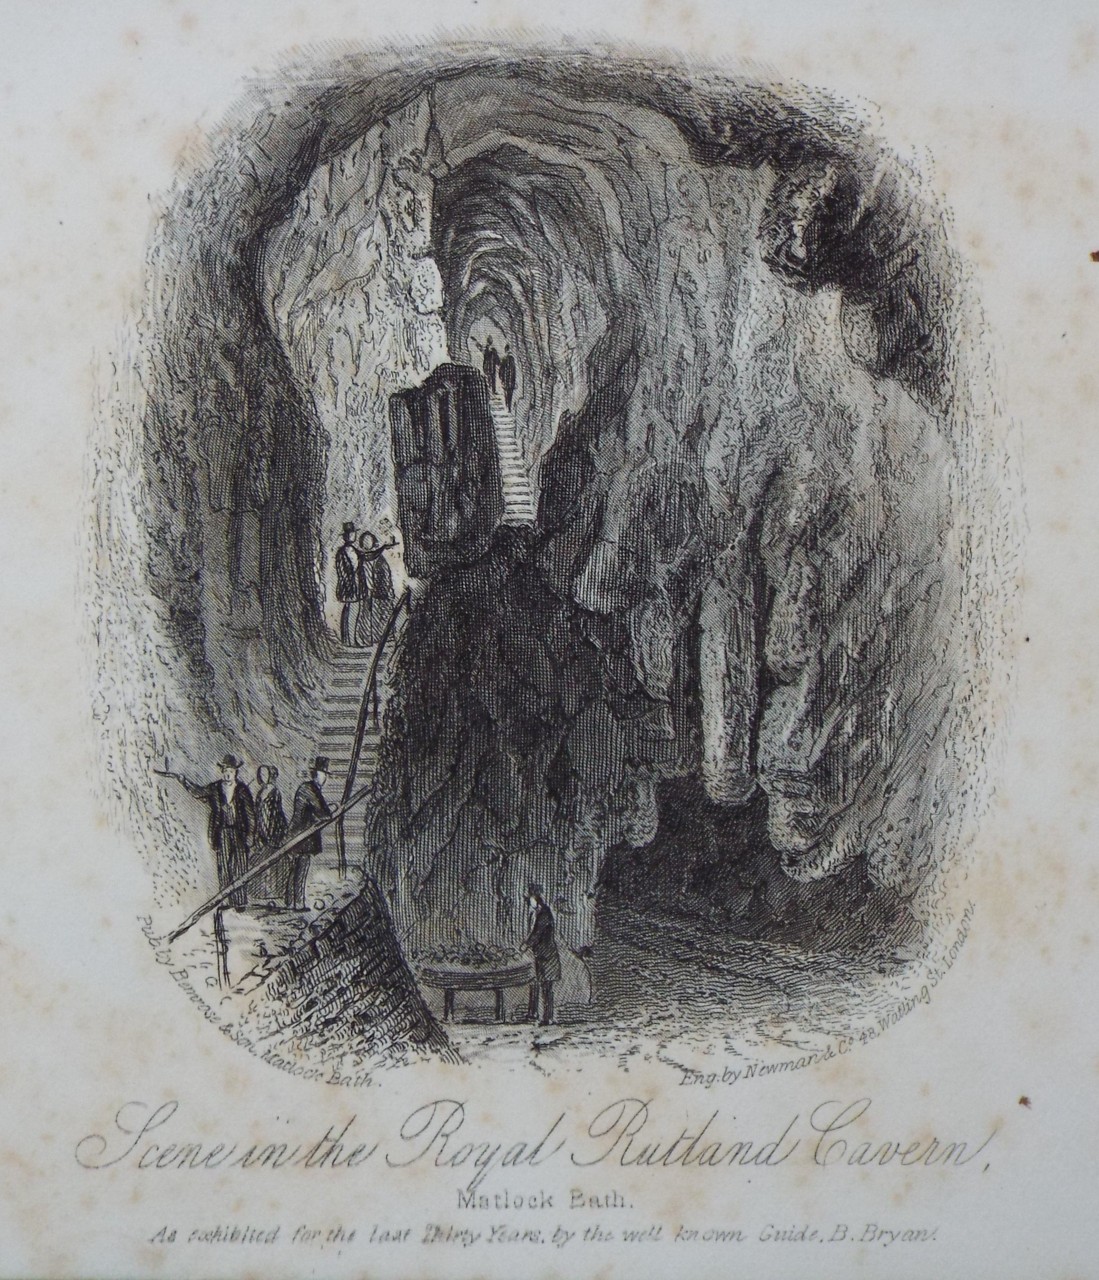 Steel Vignette - Scene in the Royal Rutland Cavern, Matlock Bath. As exhibited for the last Thirty Years, by the well known Guide, B. Bryan. - Newman